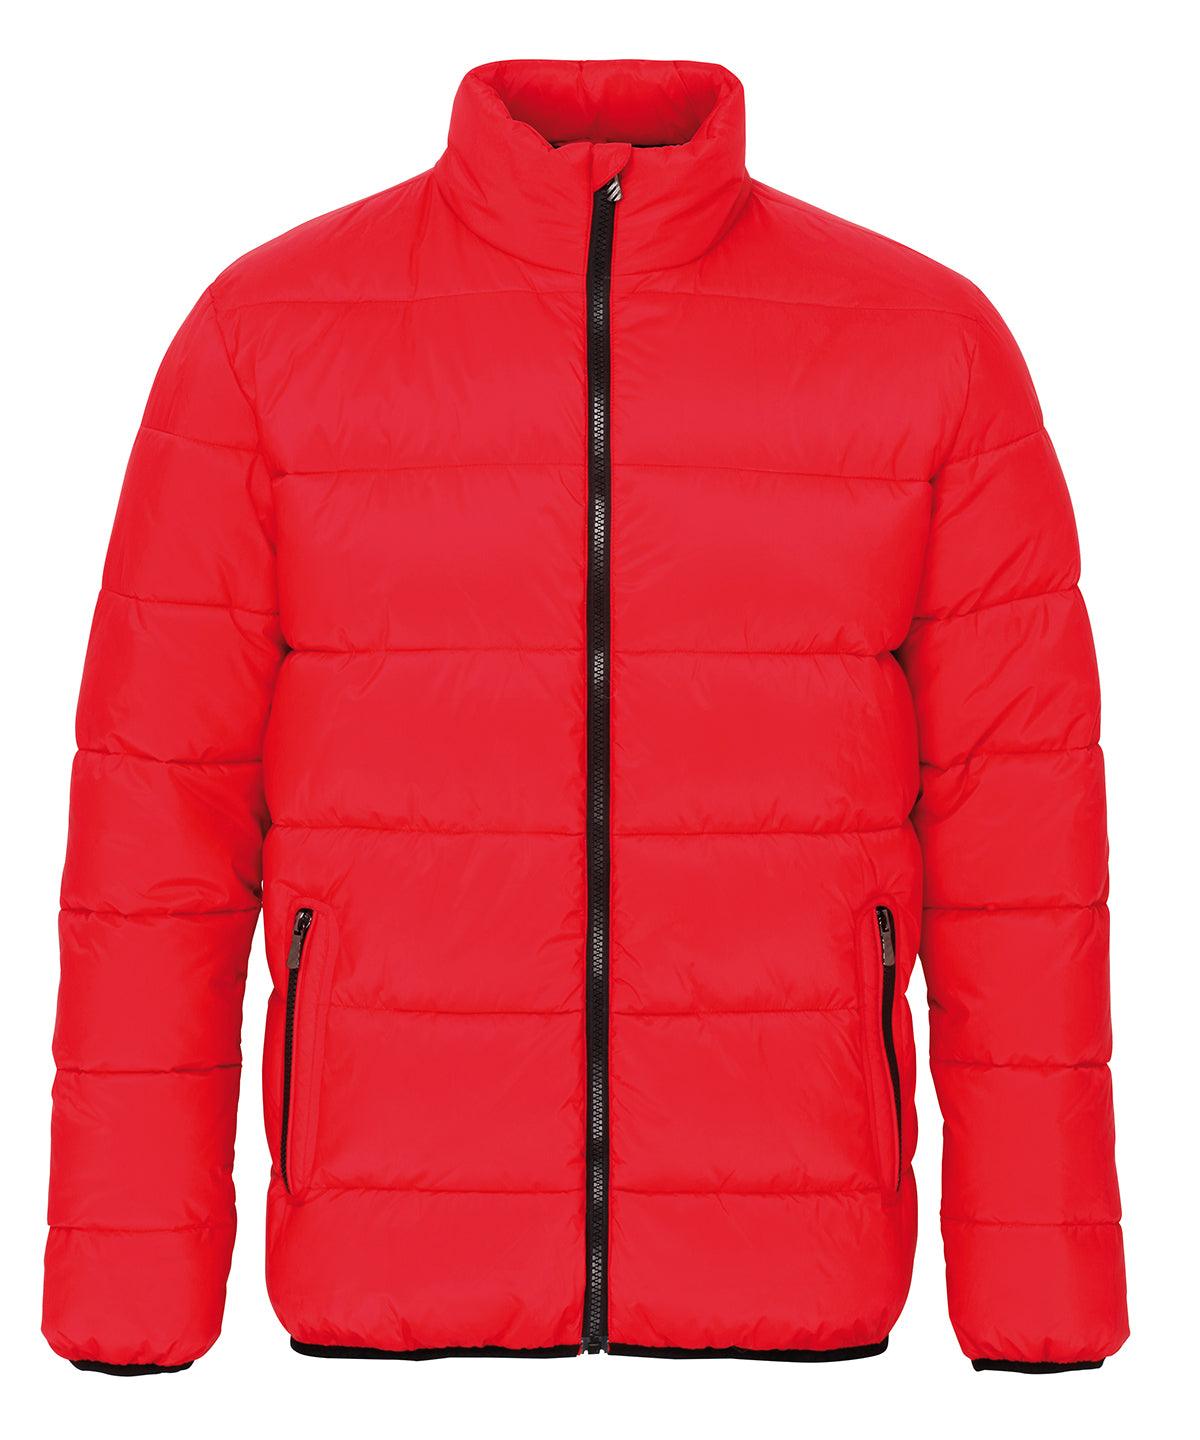 Red/Black - Venture supersoft padded jacket Jackets 2786 Jackets & Coats Schoolwear Centres